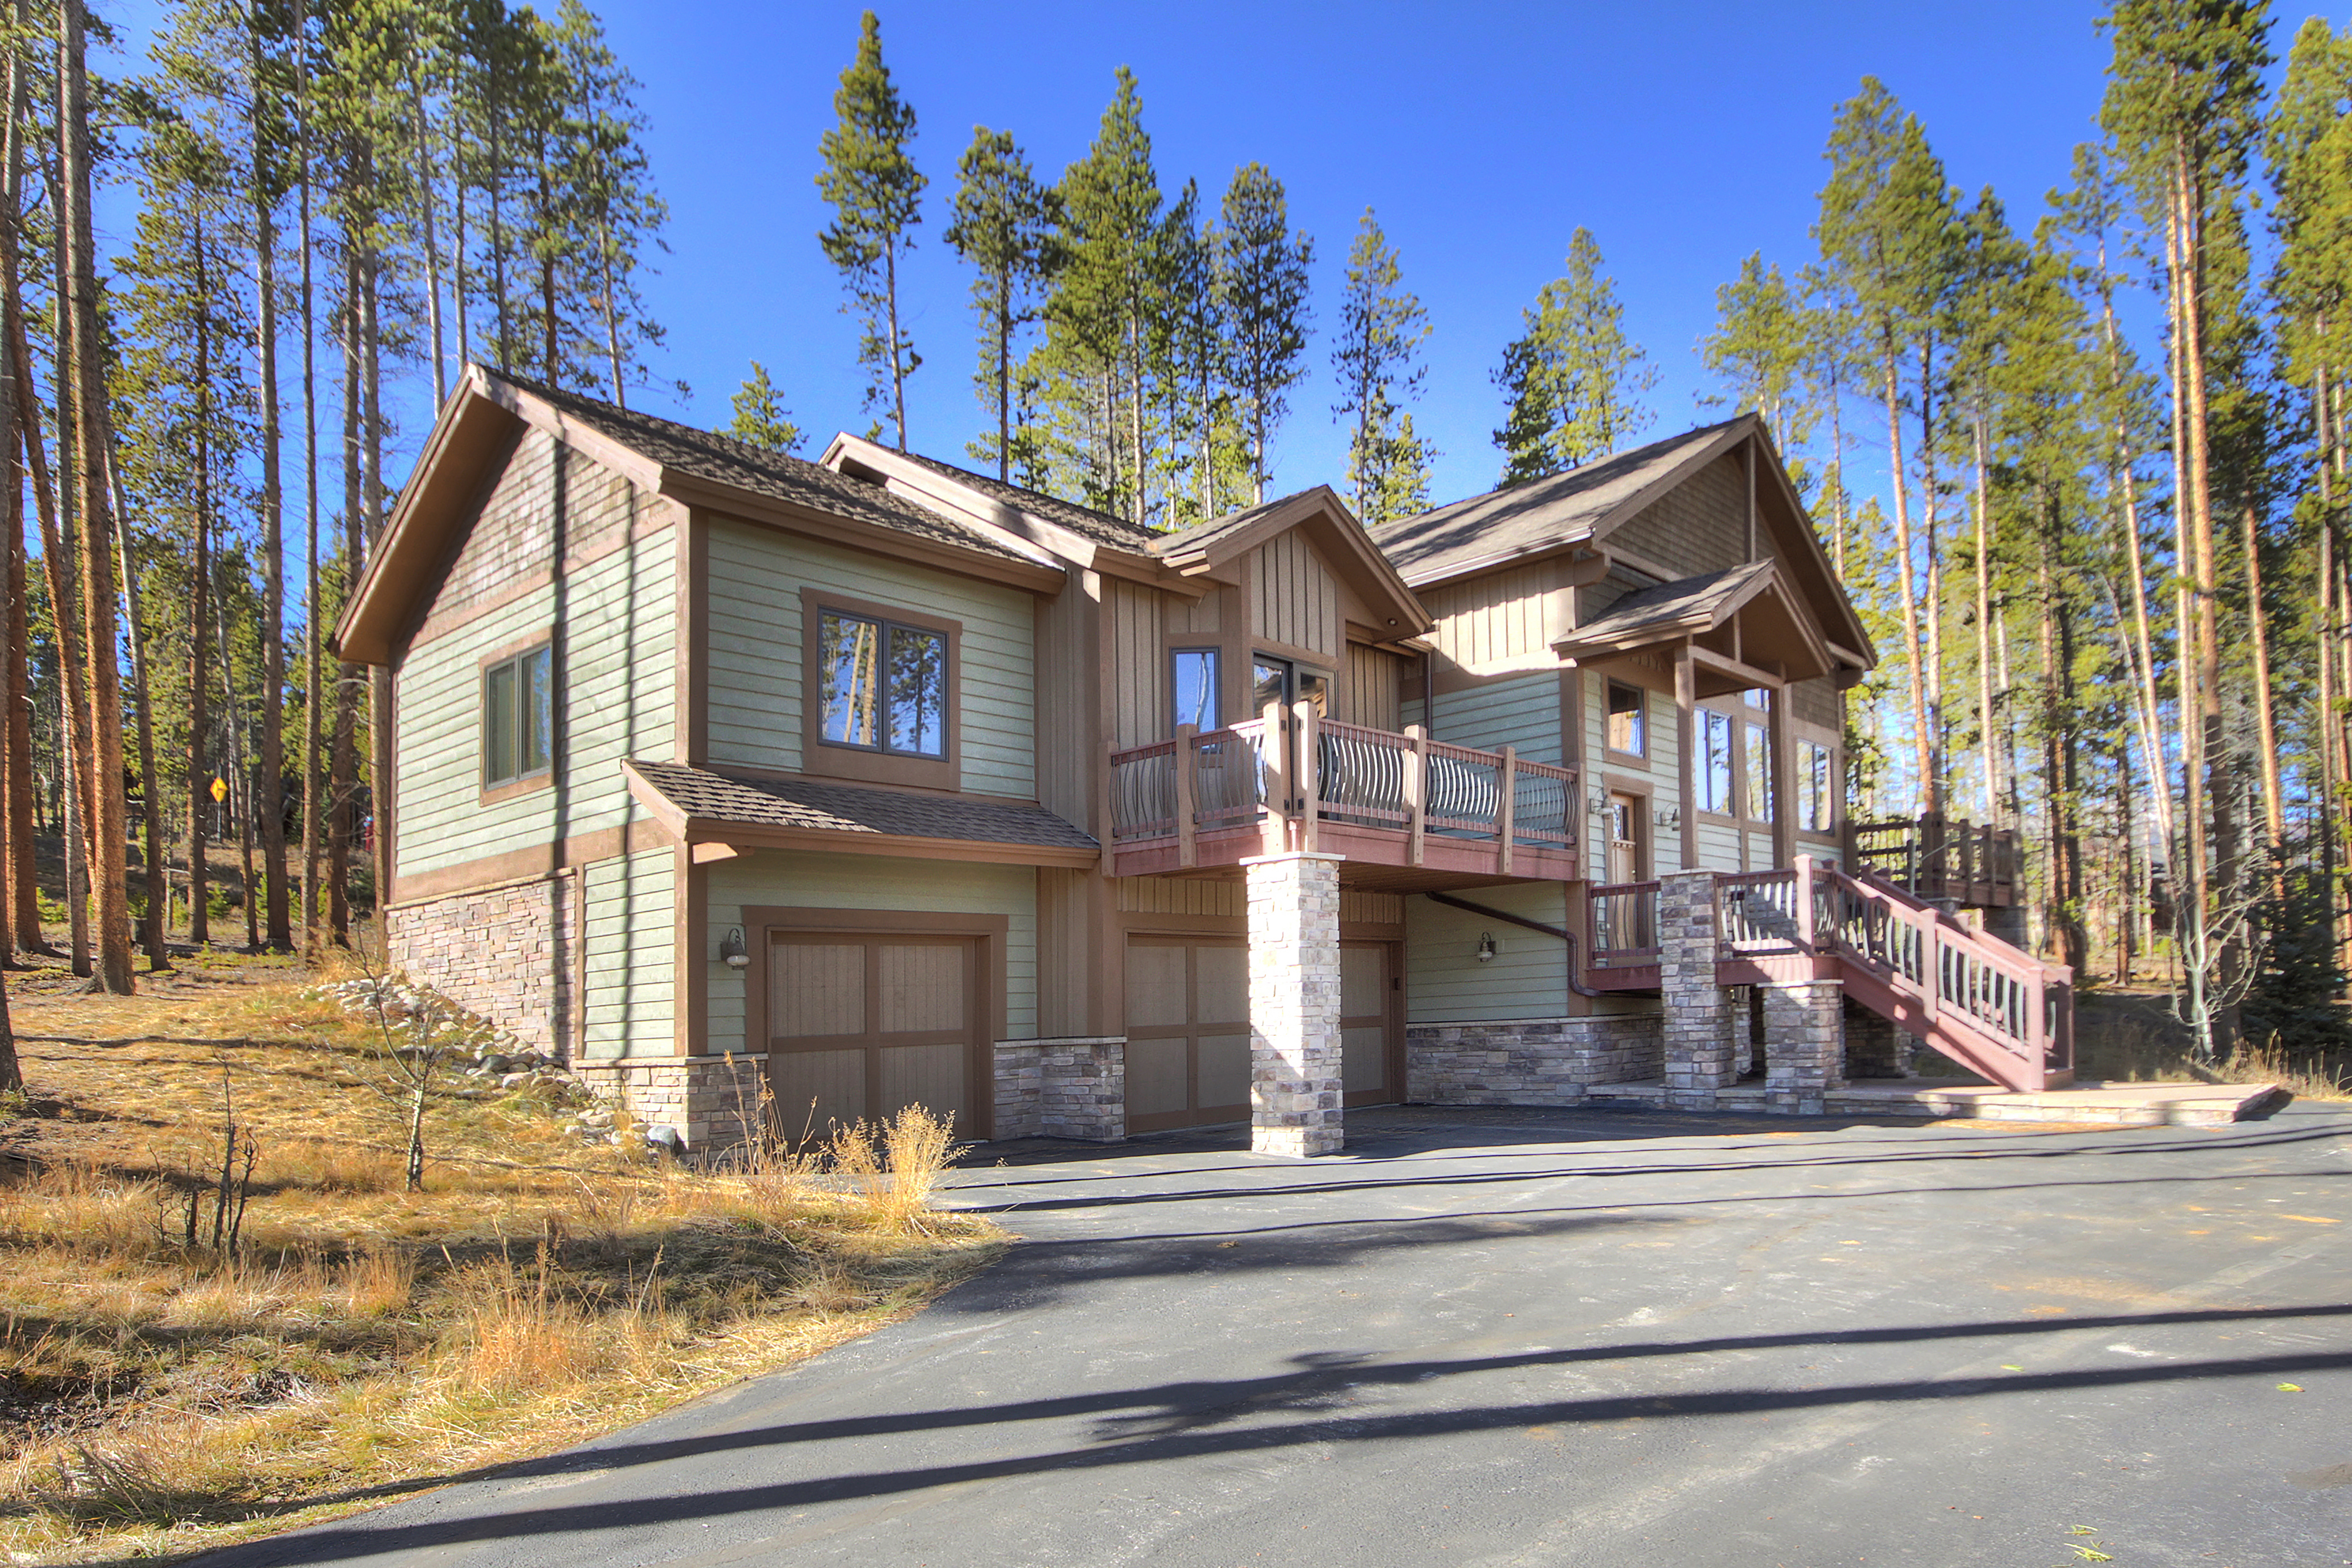 Enjoy this beautiful mountain home on your next vacation - Highlands Trail House Breckenridge Vacation Rental